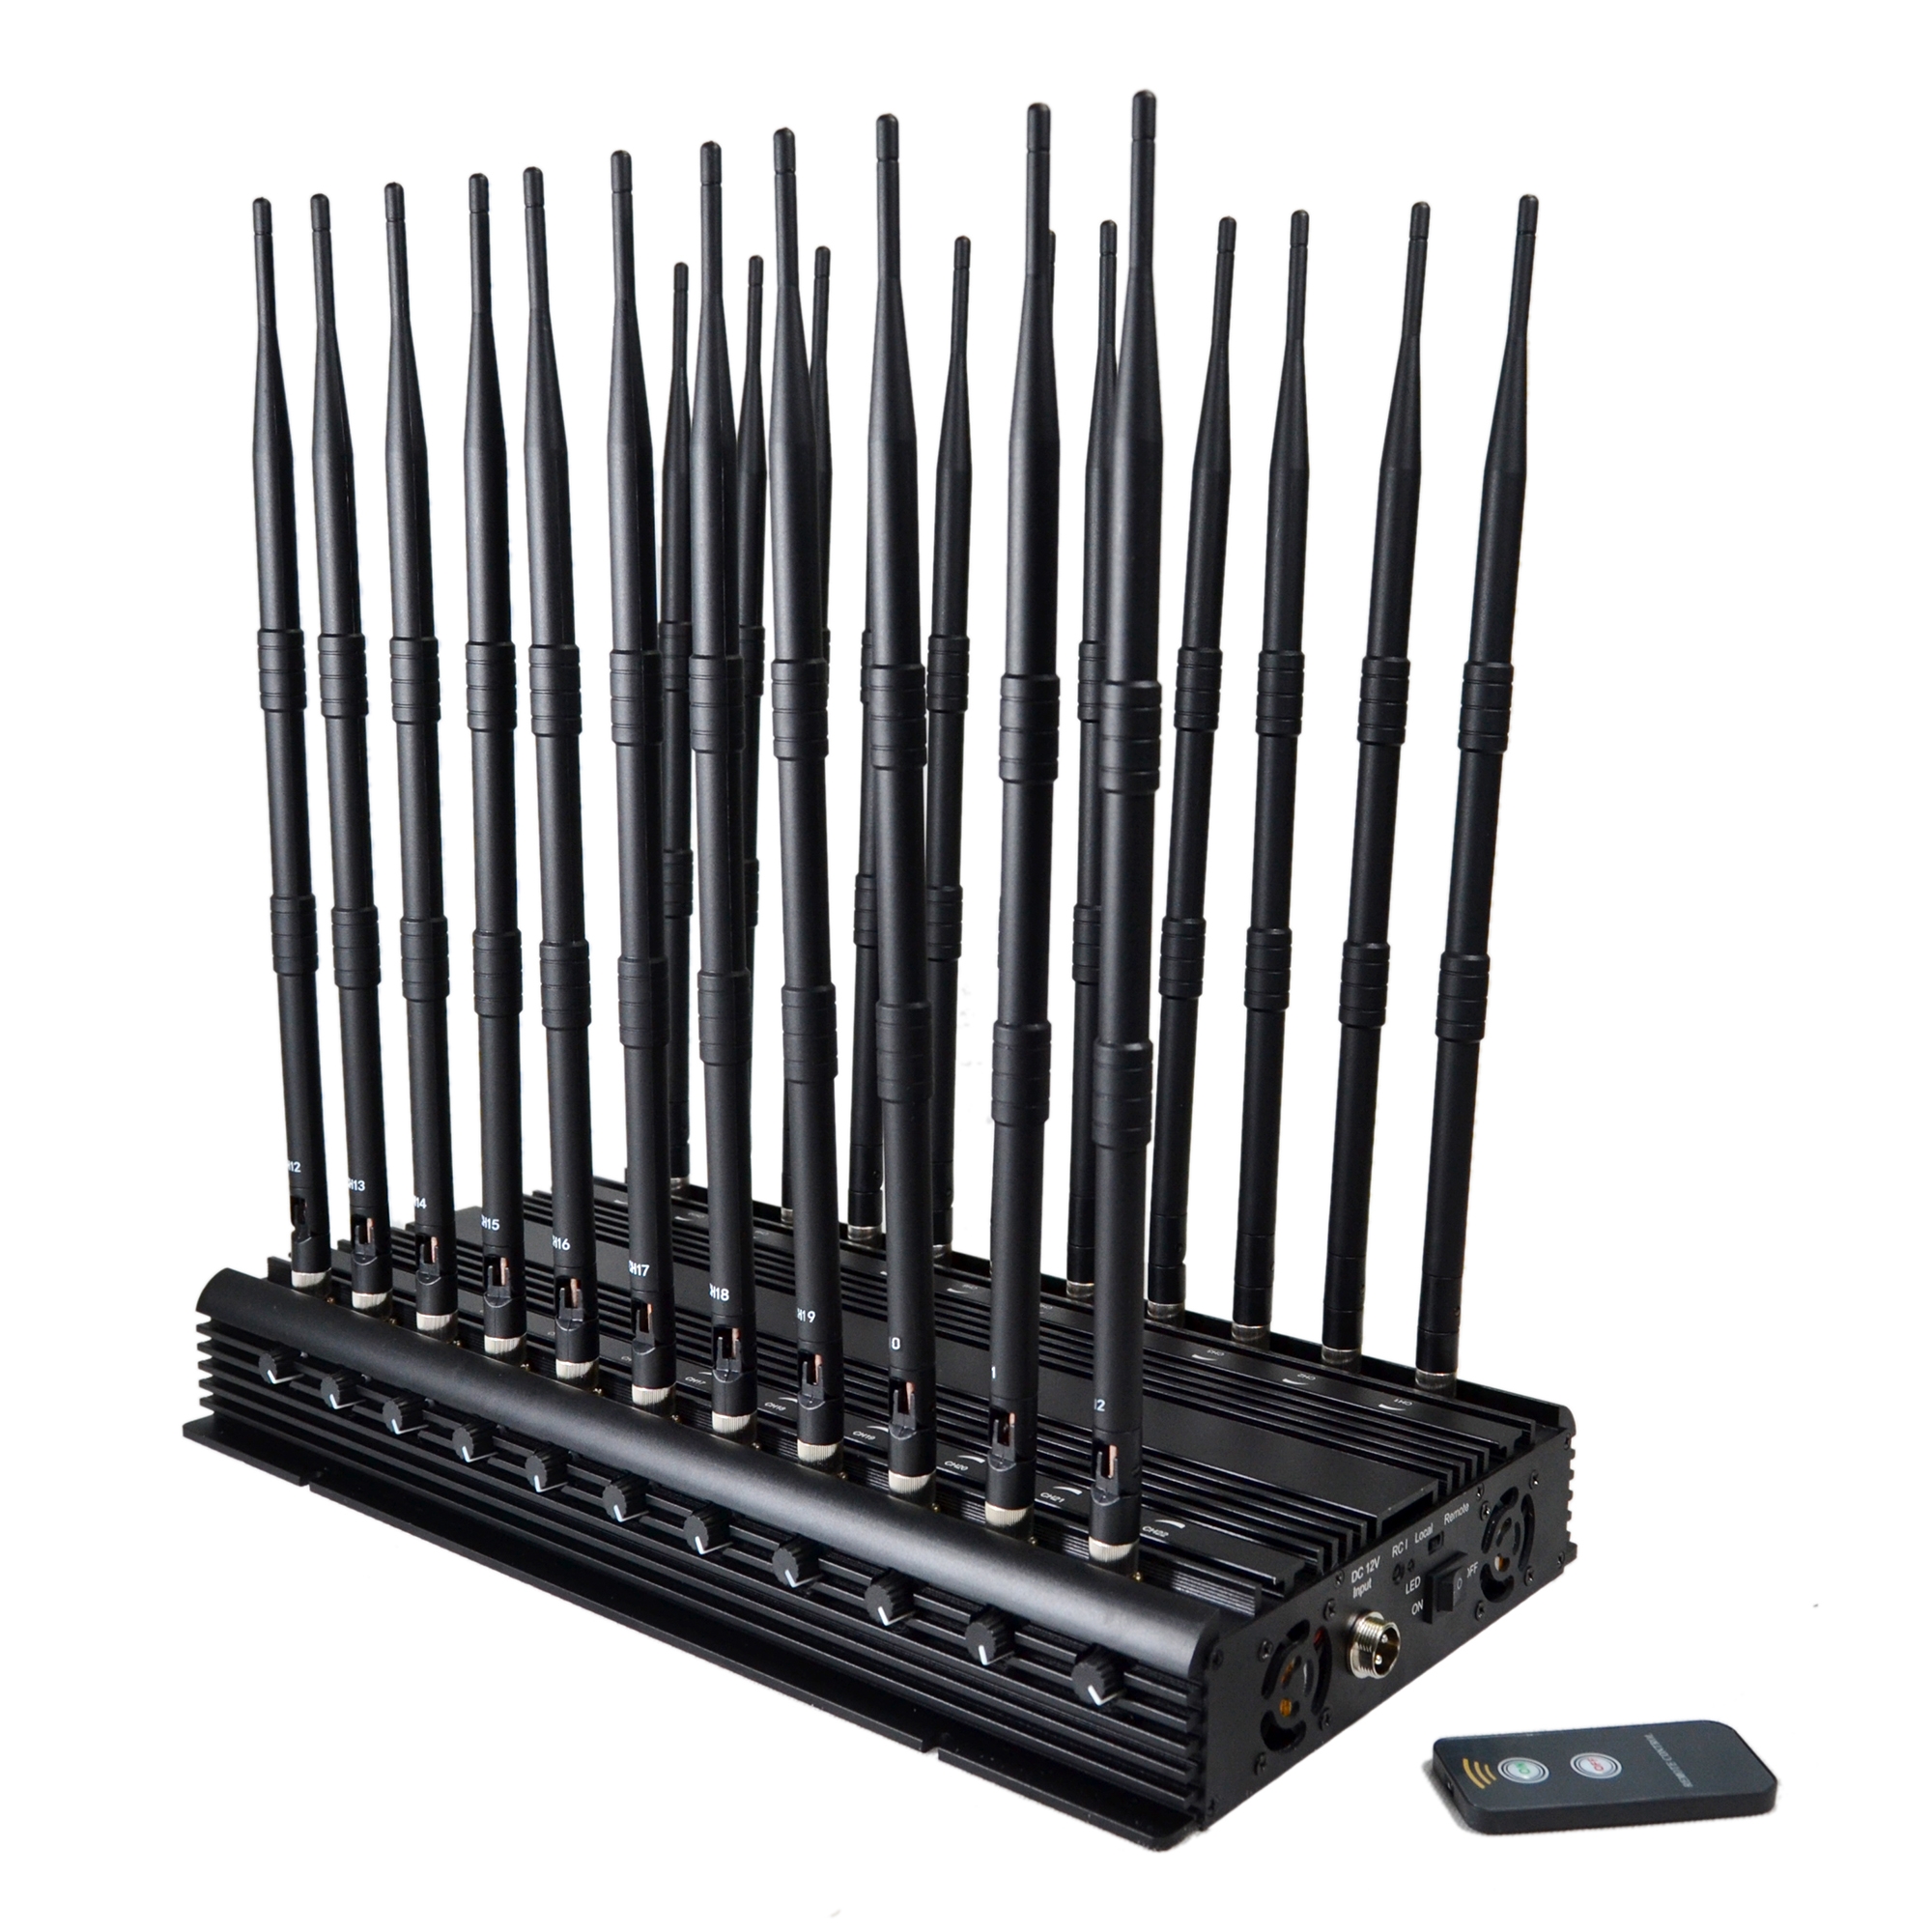 Tips for Using a Bluetooth Jammer Effectively